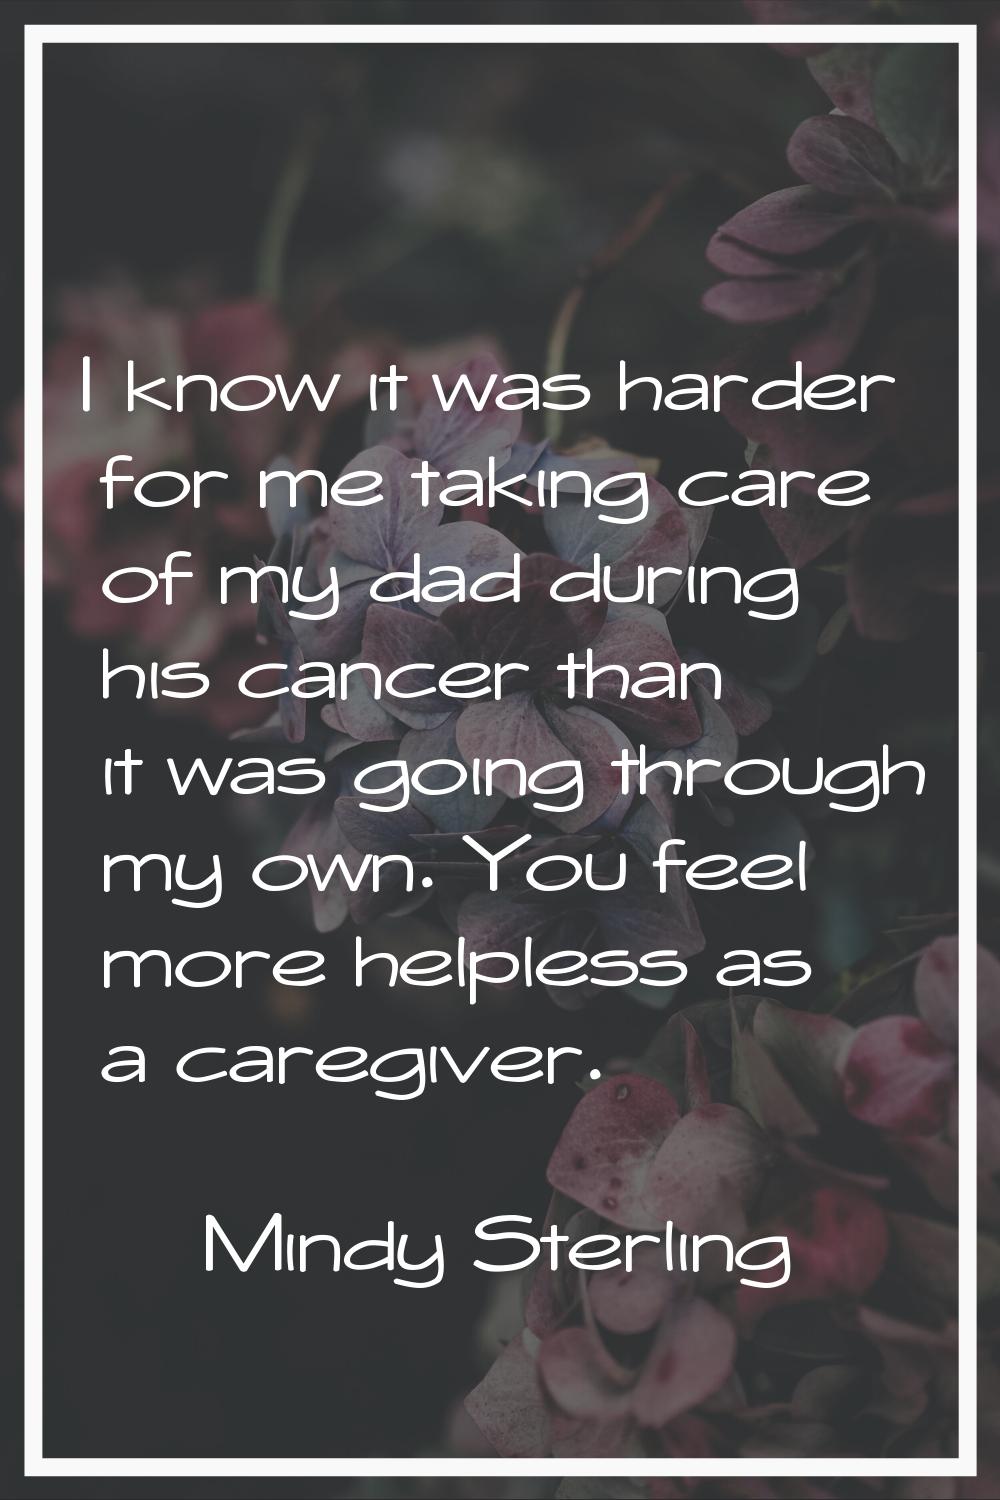 I know it was harder for me taking care of my dad during his cancer than it was going through my ow